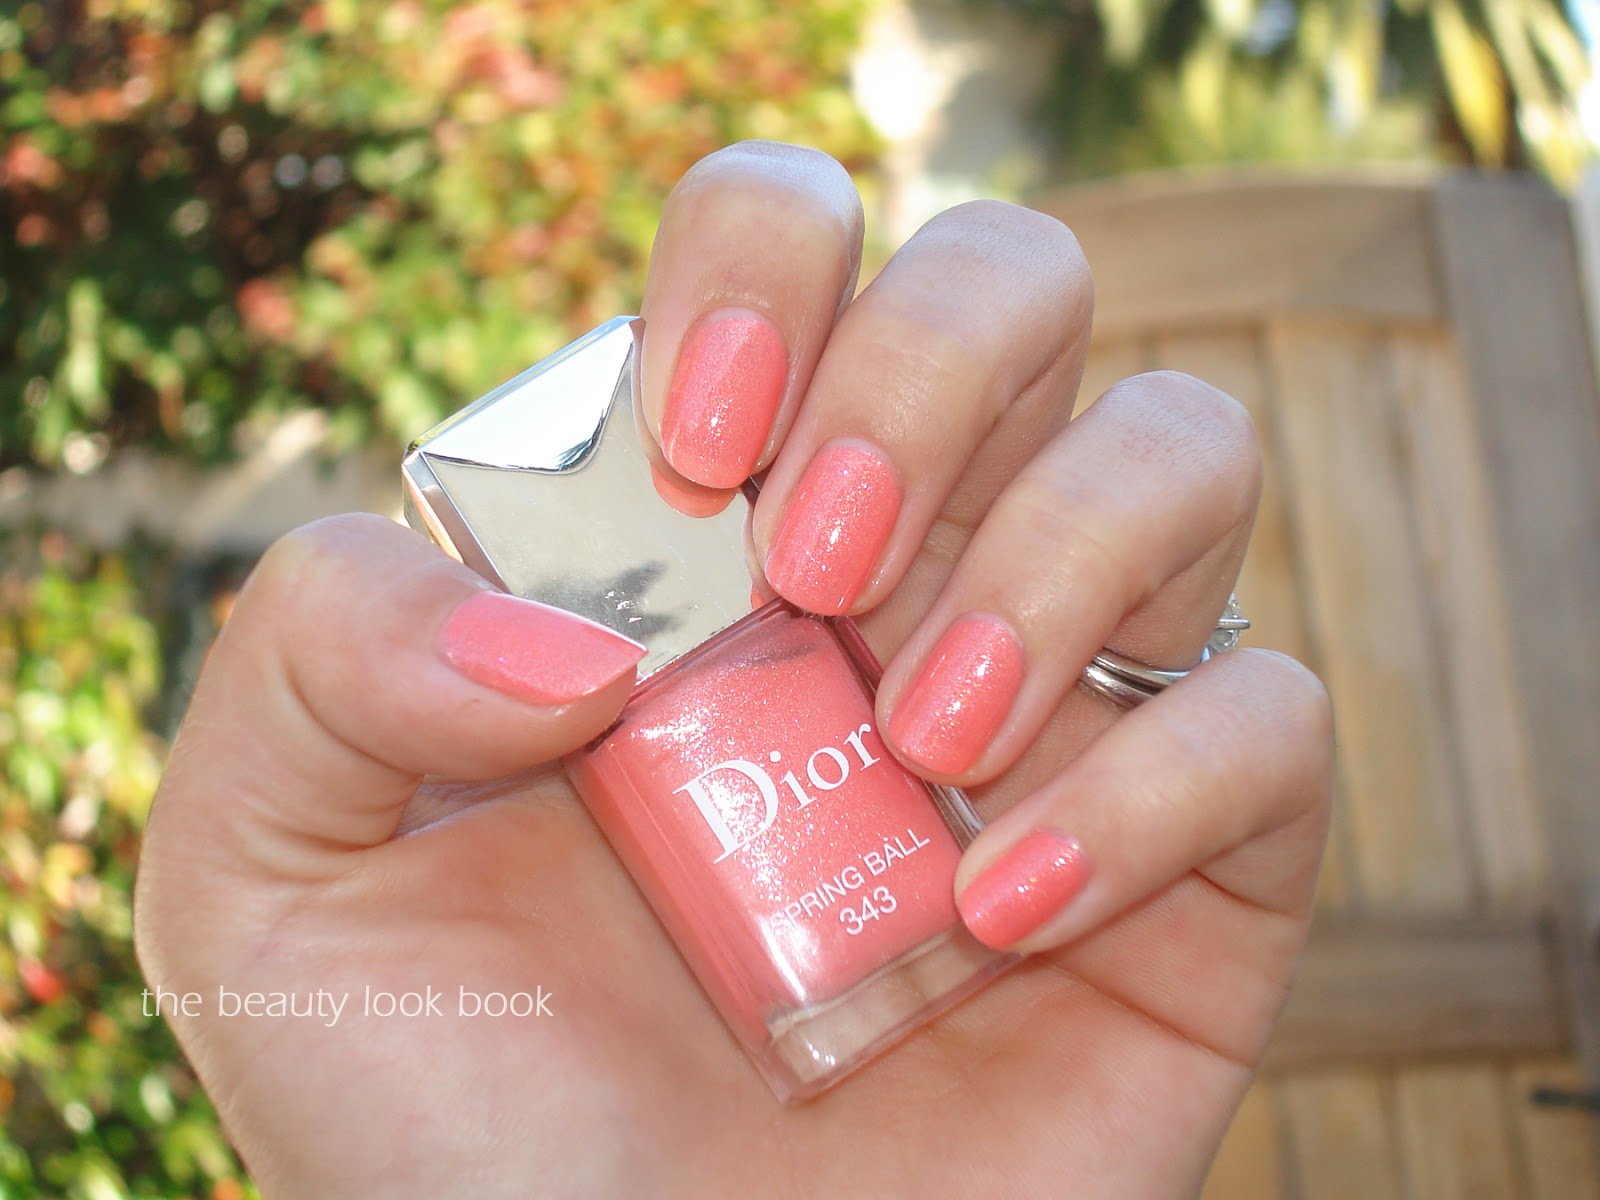 Dior Spring Ball 343 Vernis Nail Lacquer, Addict Lipstick and